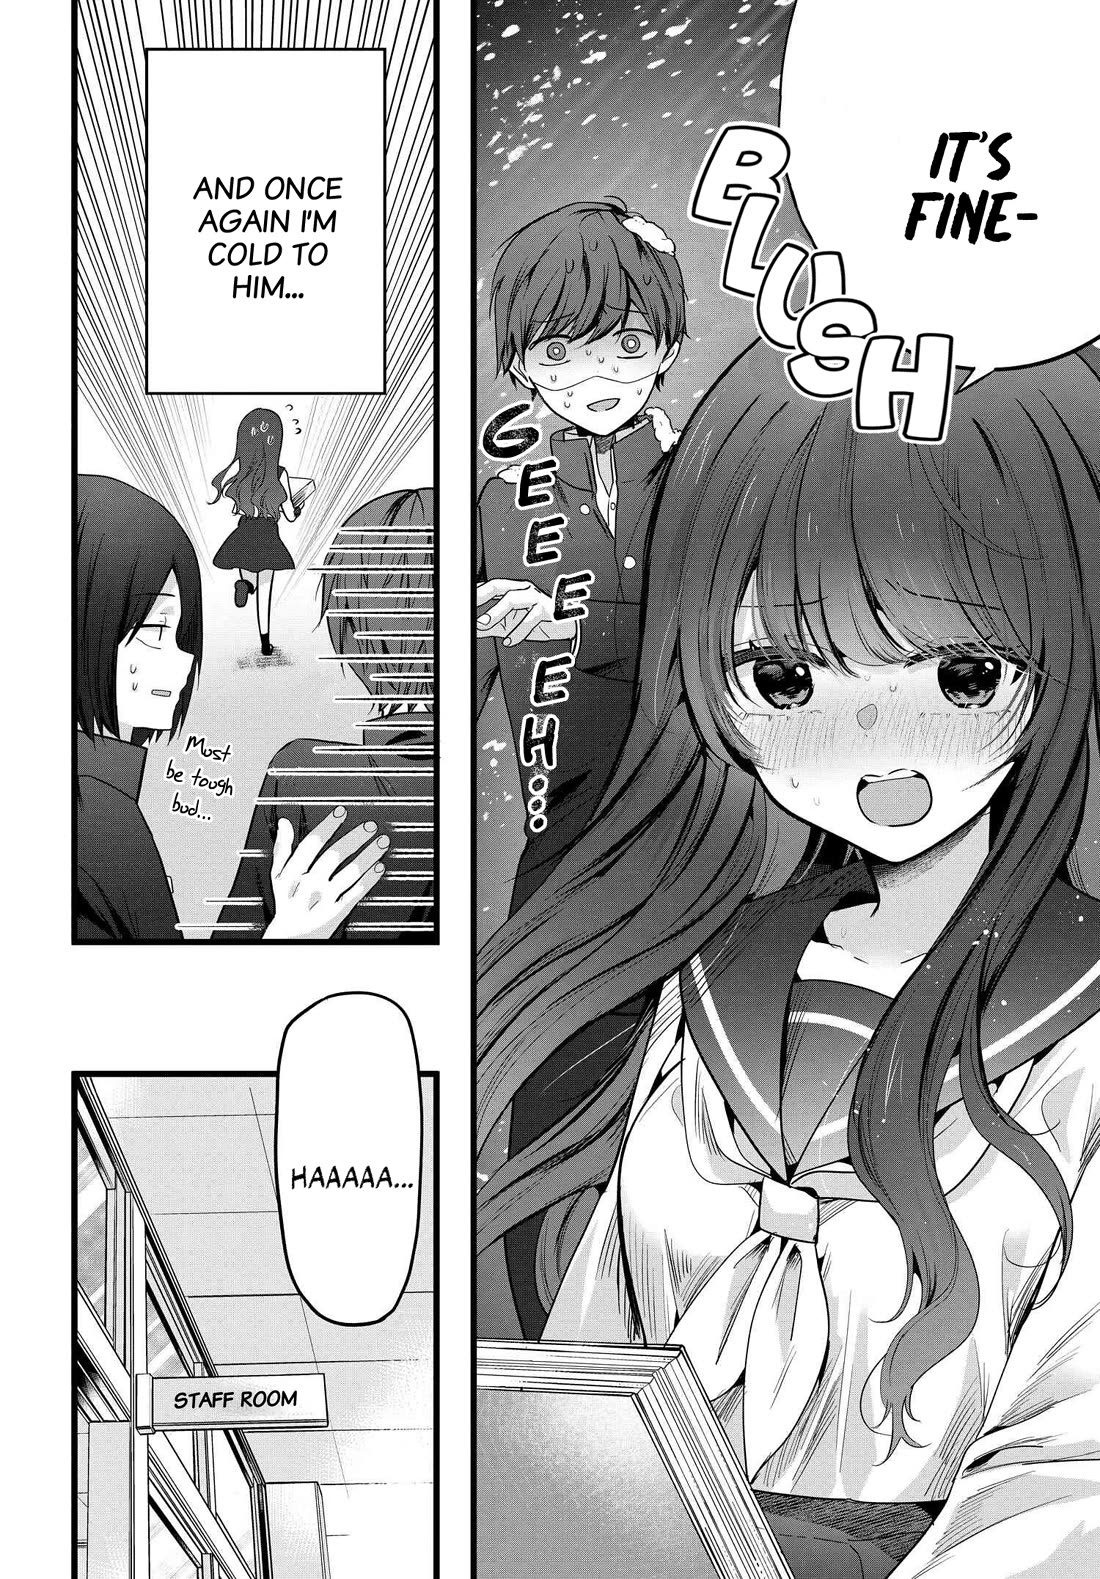 Tozaki-san Is Cold Only to Me - chapter 2 - #2